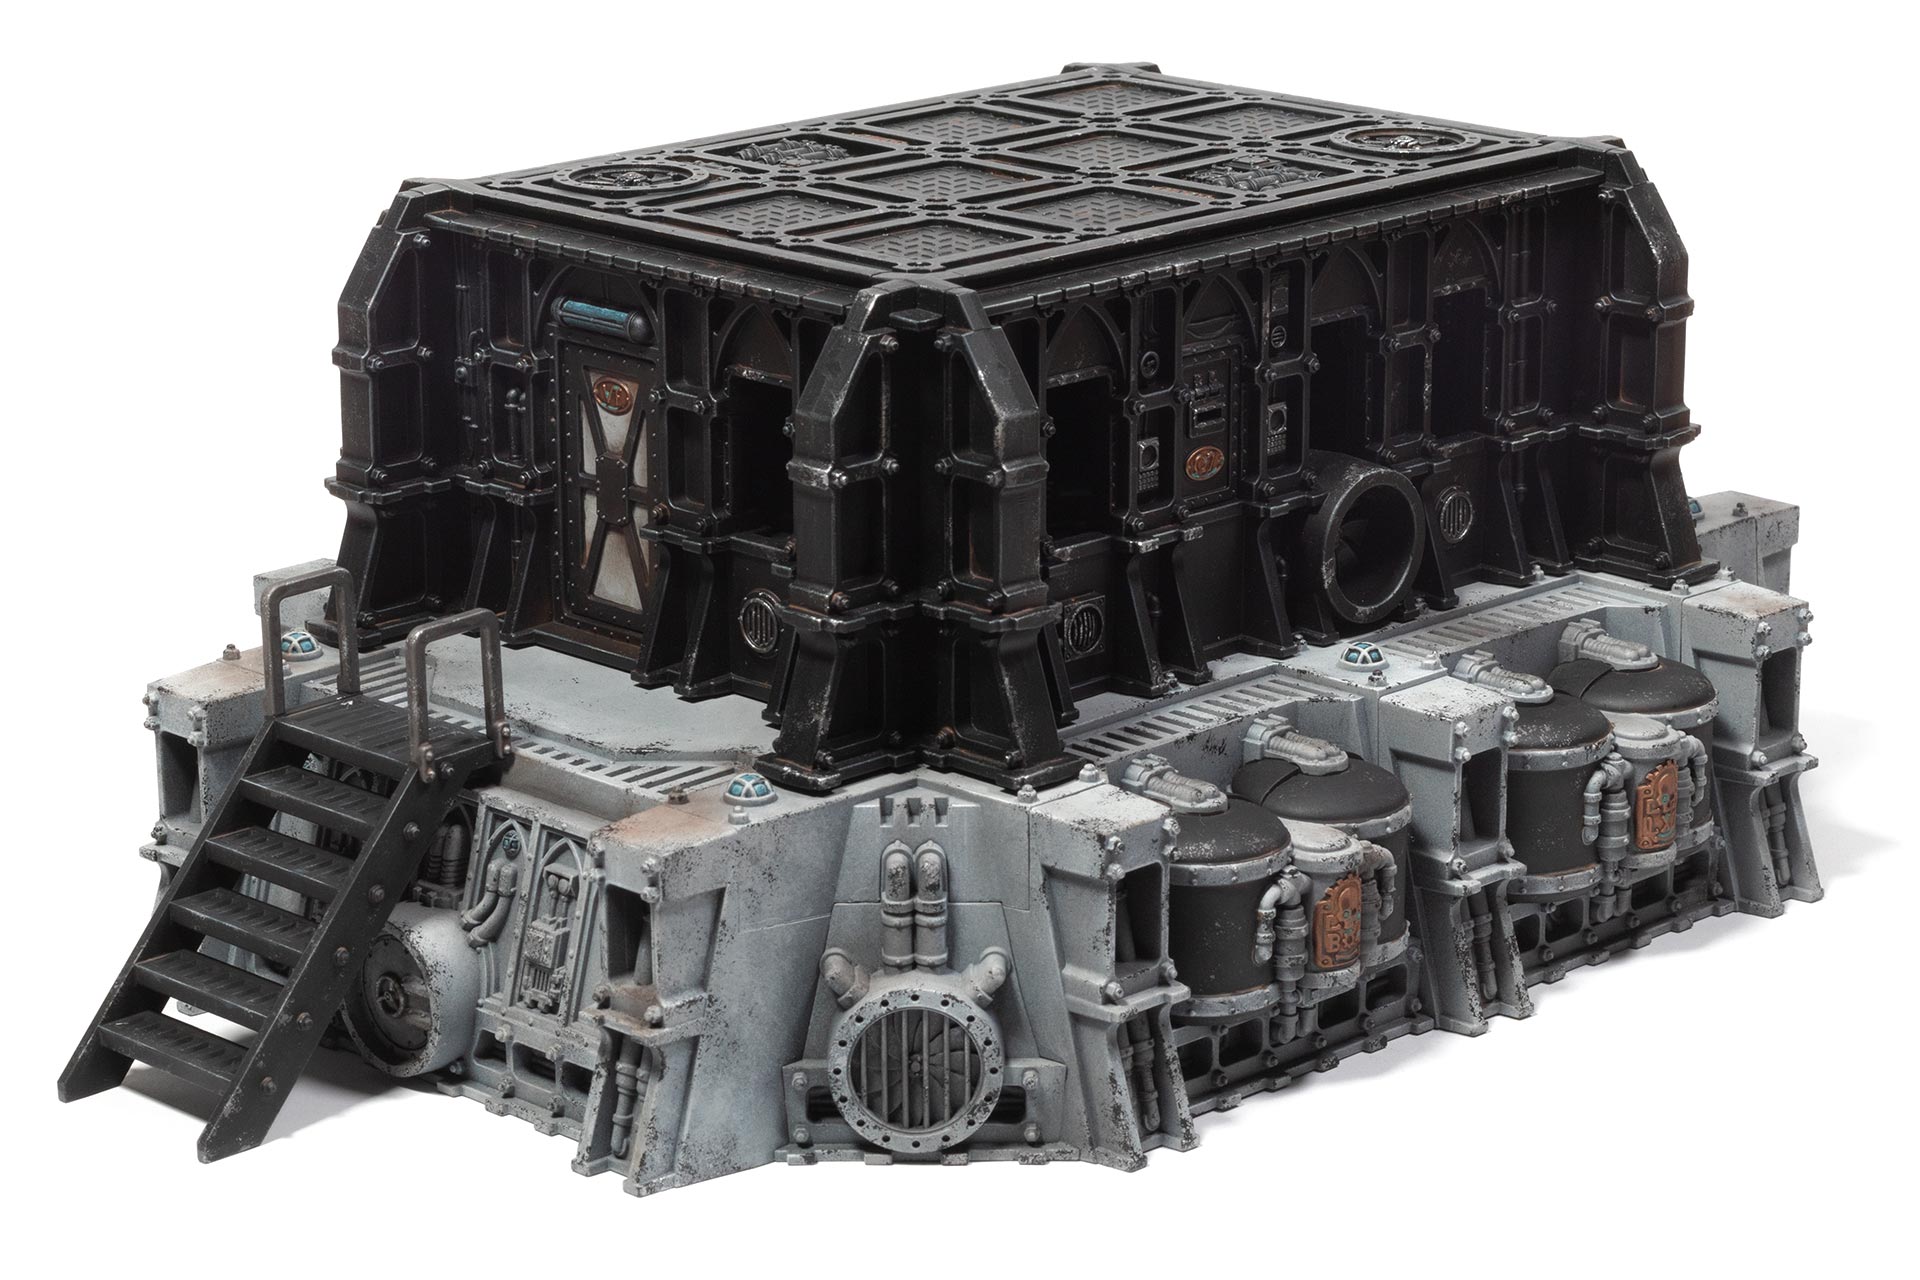 STC Hab-Bunker and Landing Pad from Kill Team / Killzone Moroch combined